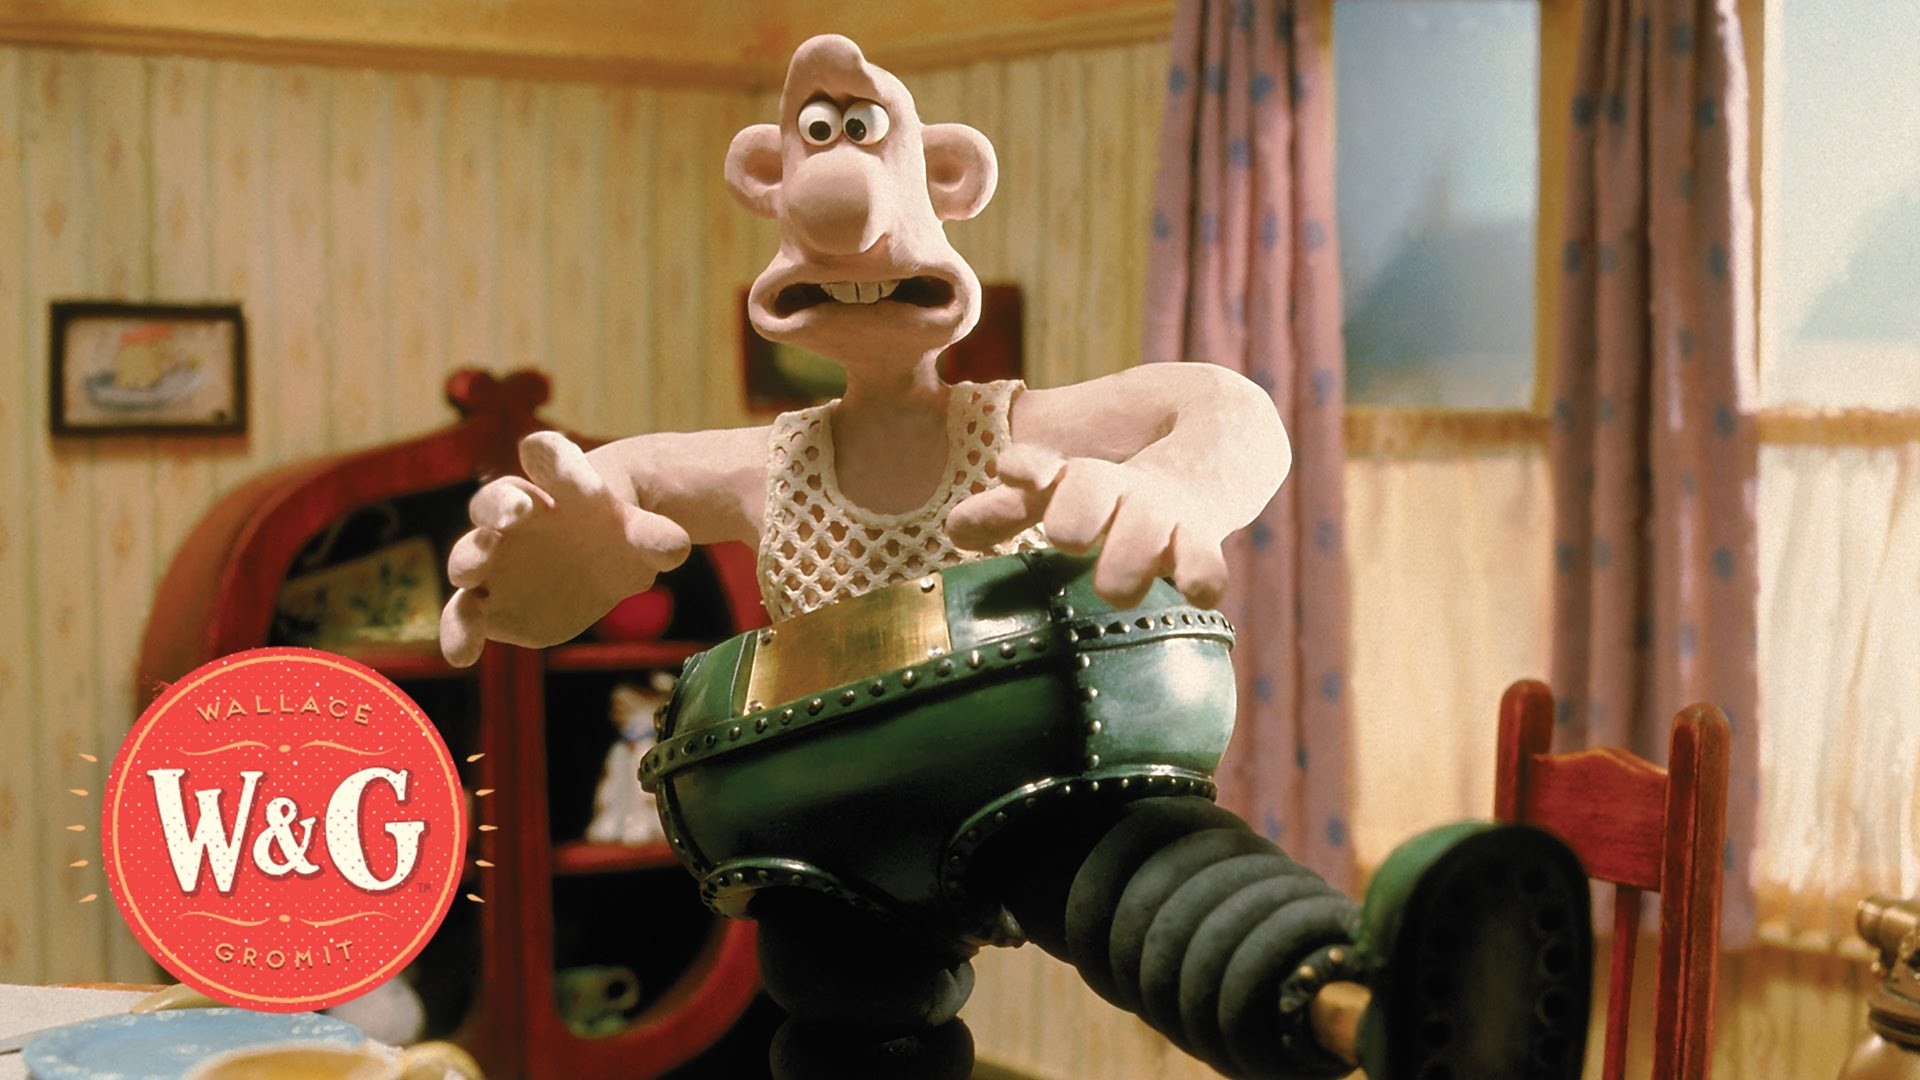 Wallace and Gromit Wallpaper ·① WallpaperTag